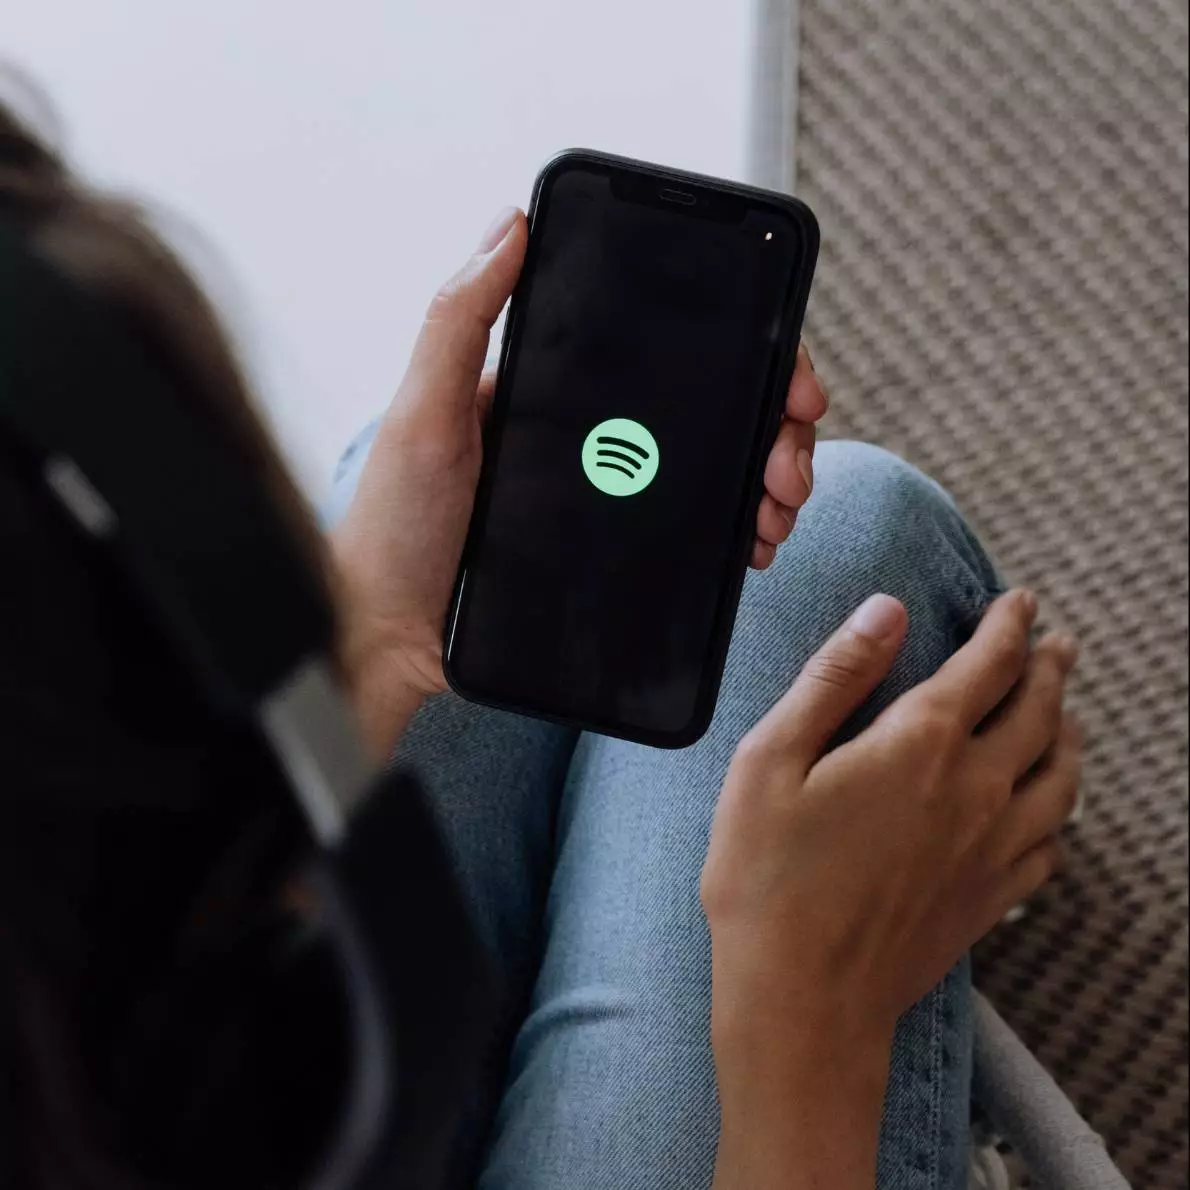 Spotify app open on phone. Person holding phone with headphones on.